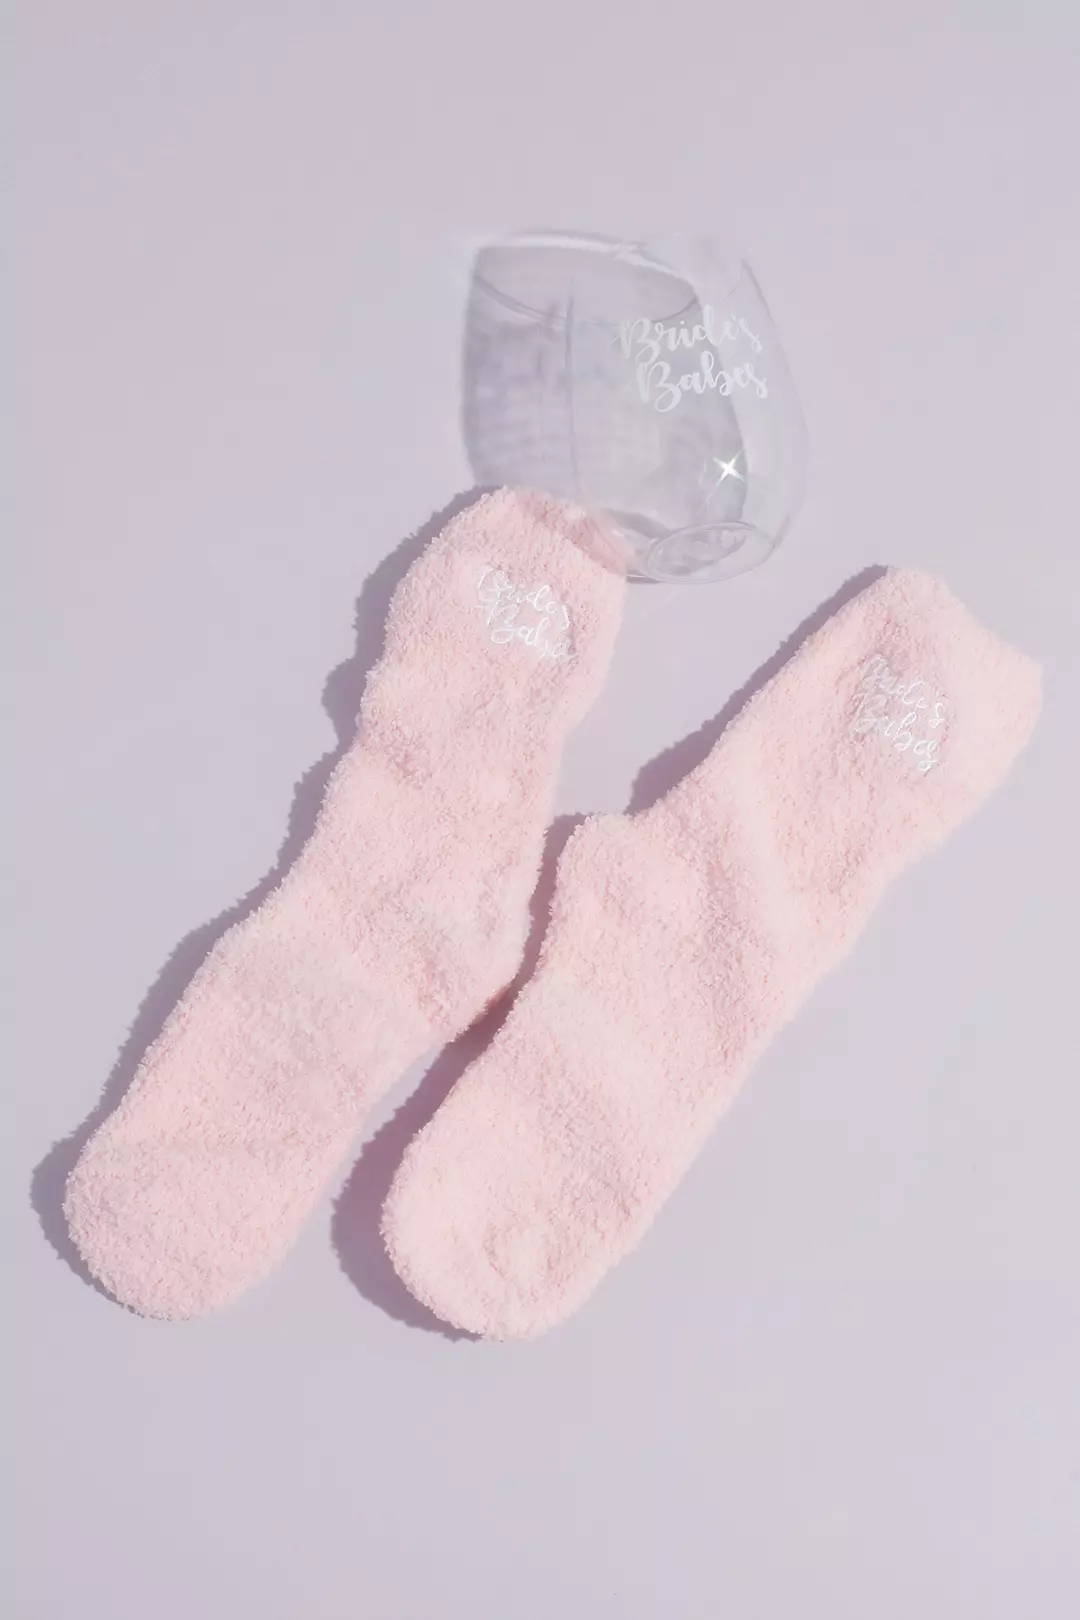 Bride Babes Wine Glass and Fuzzy Socks Gift Set Image